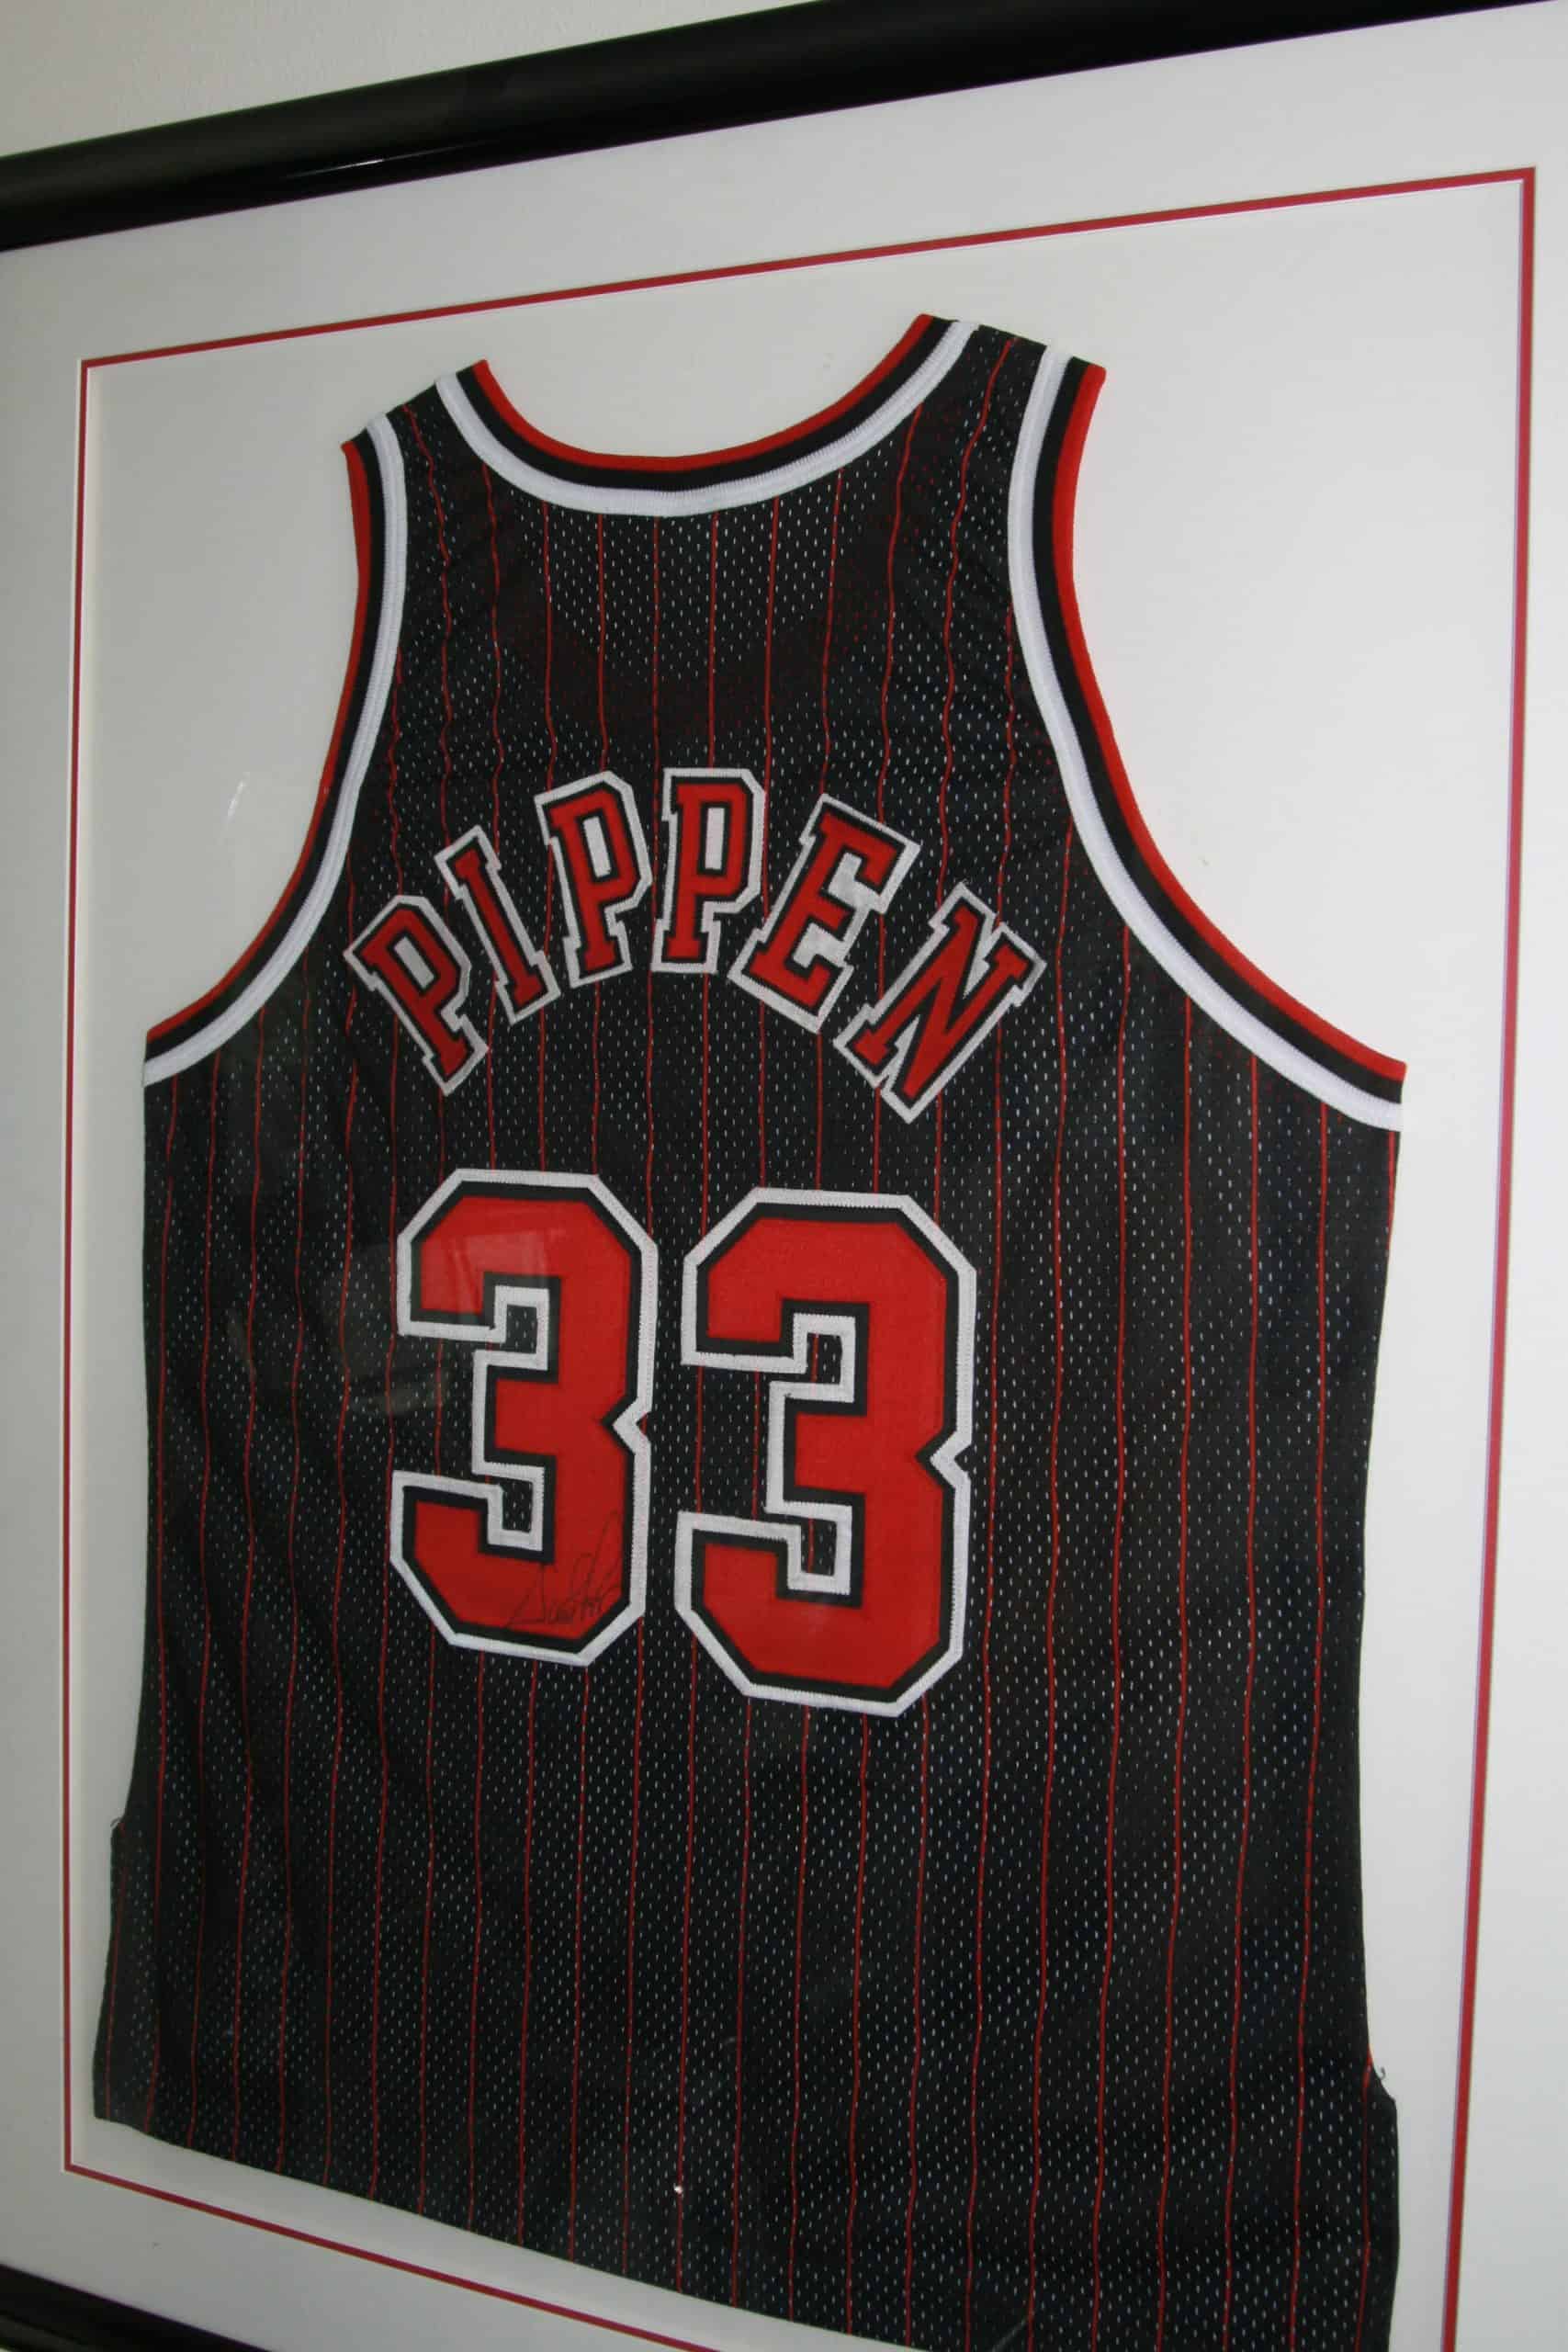 Scottie Pippen Autographed and Framed Red Bulls Jersey